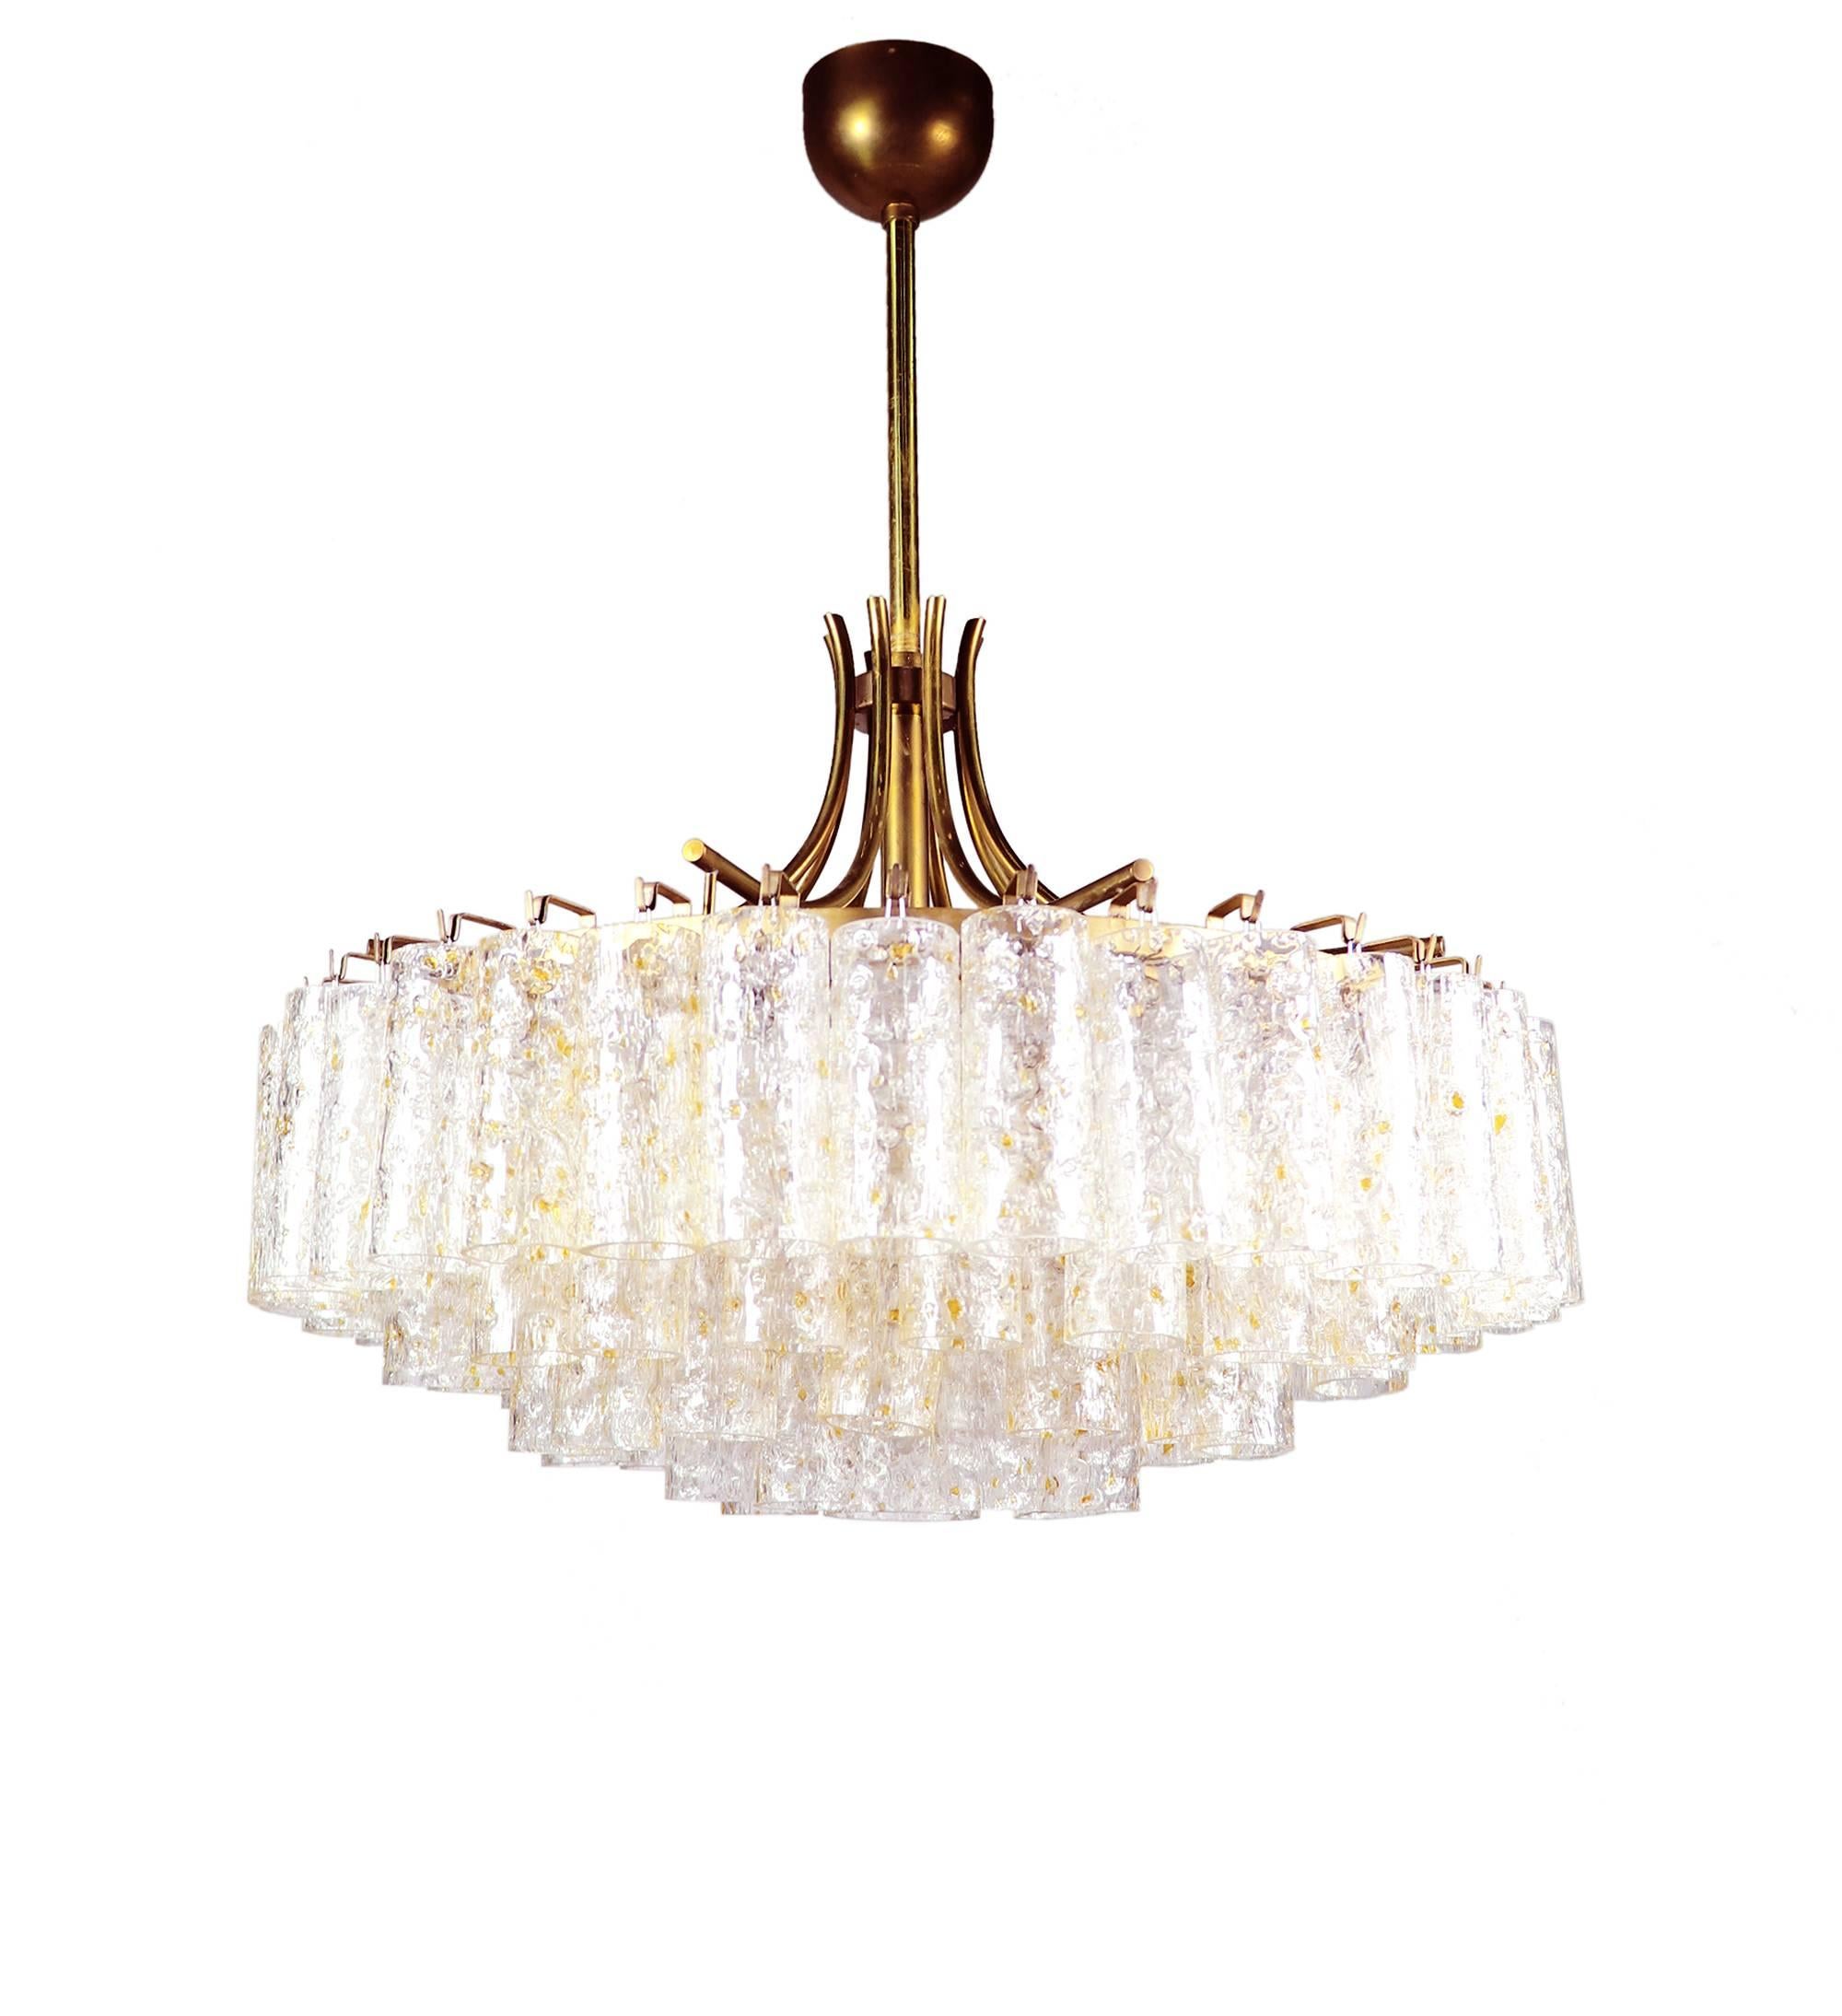 Mid-20th Century Large Chandelier with Gold Flaked Murano Glass Tubes by Doria, Germany, 1960s